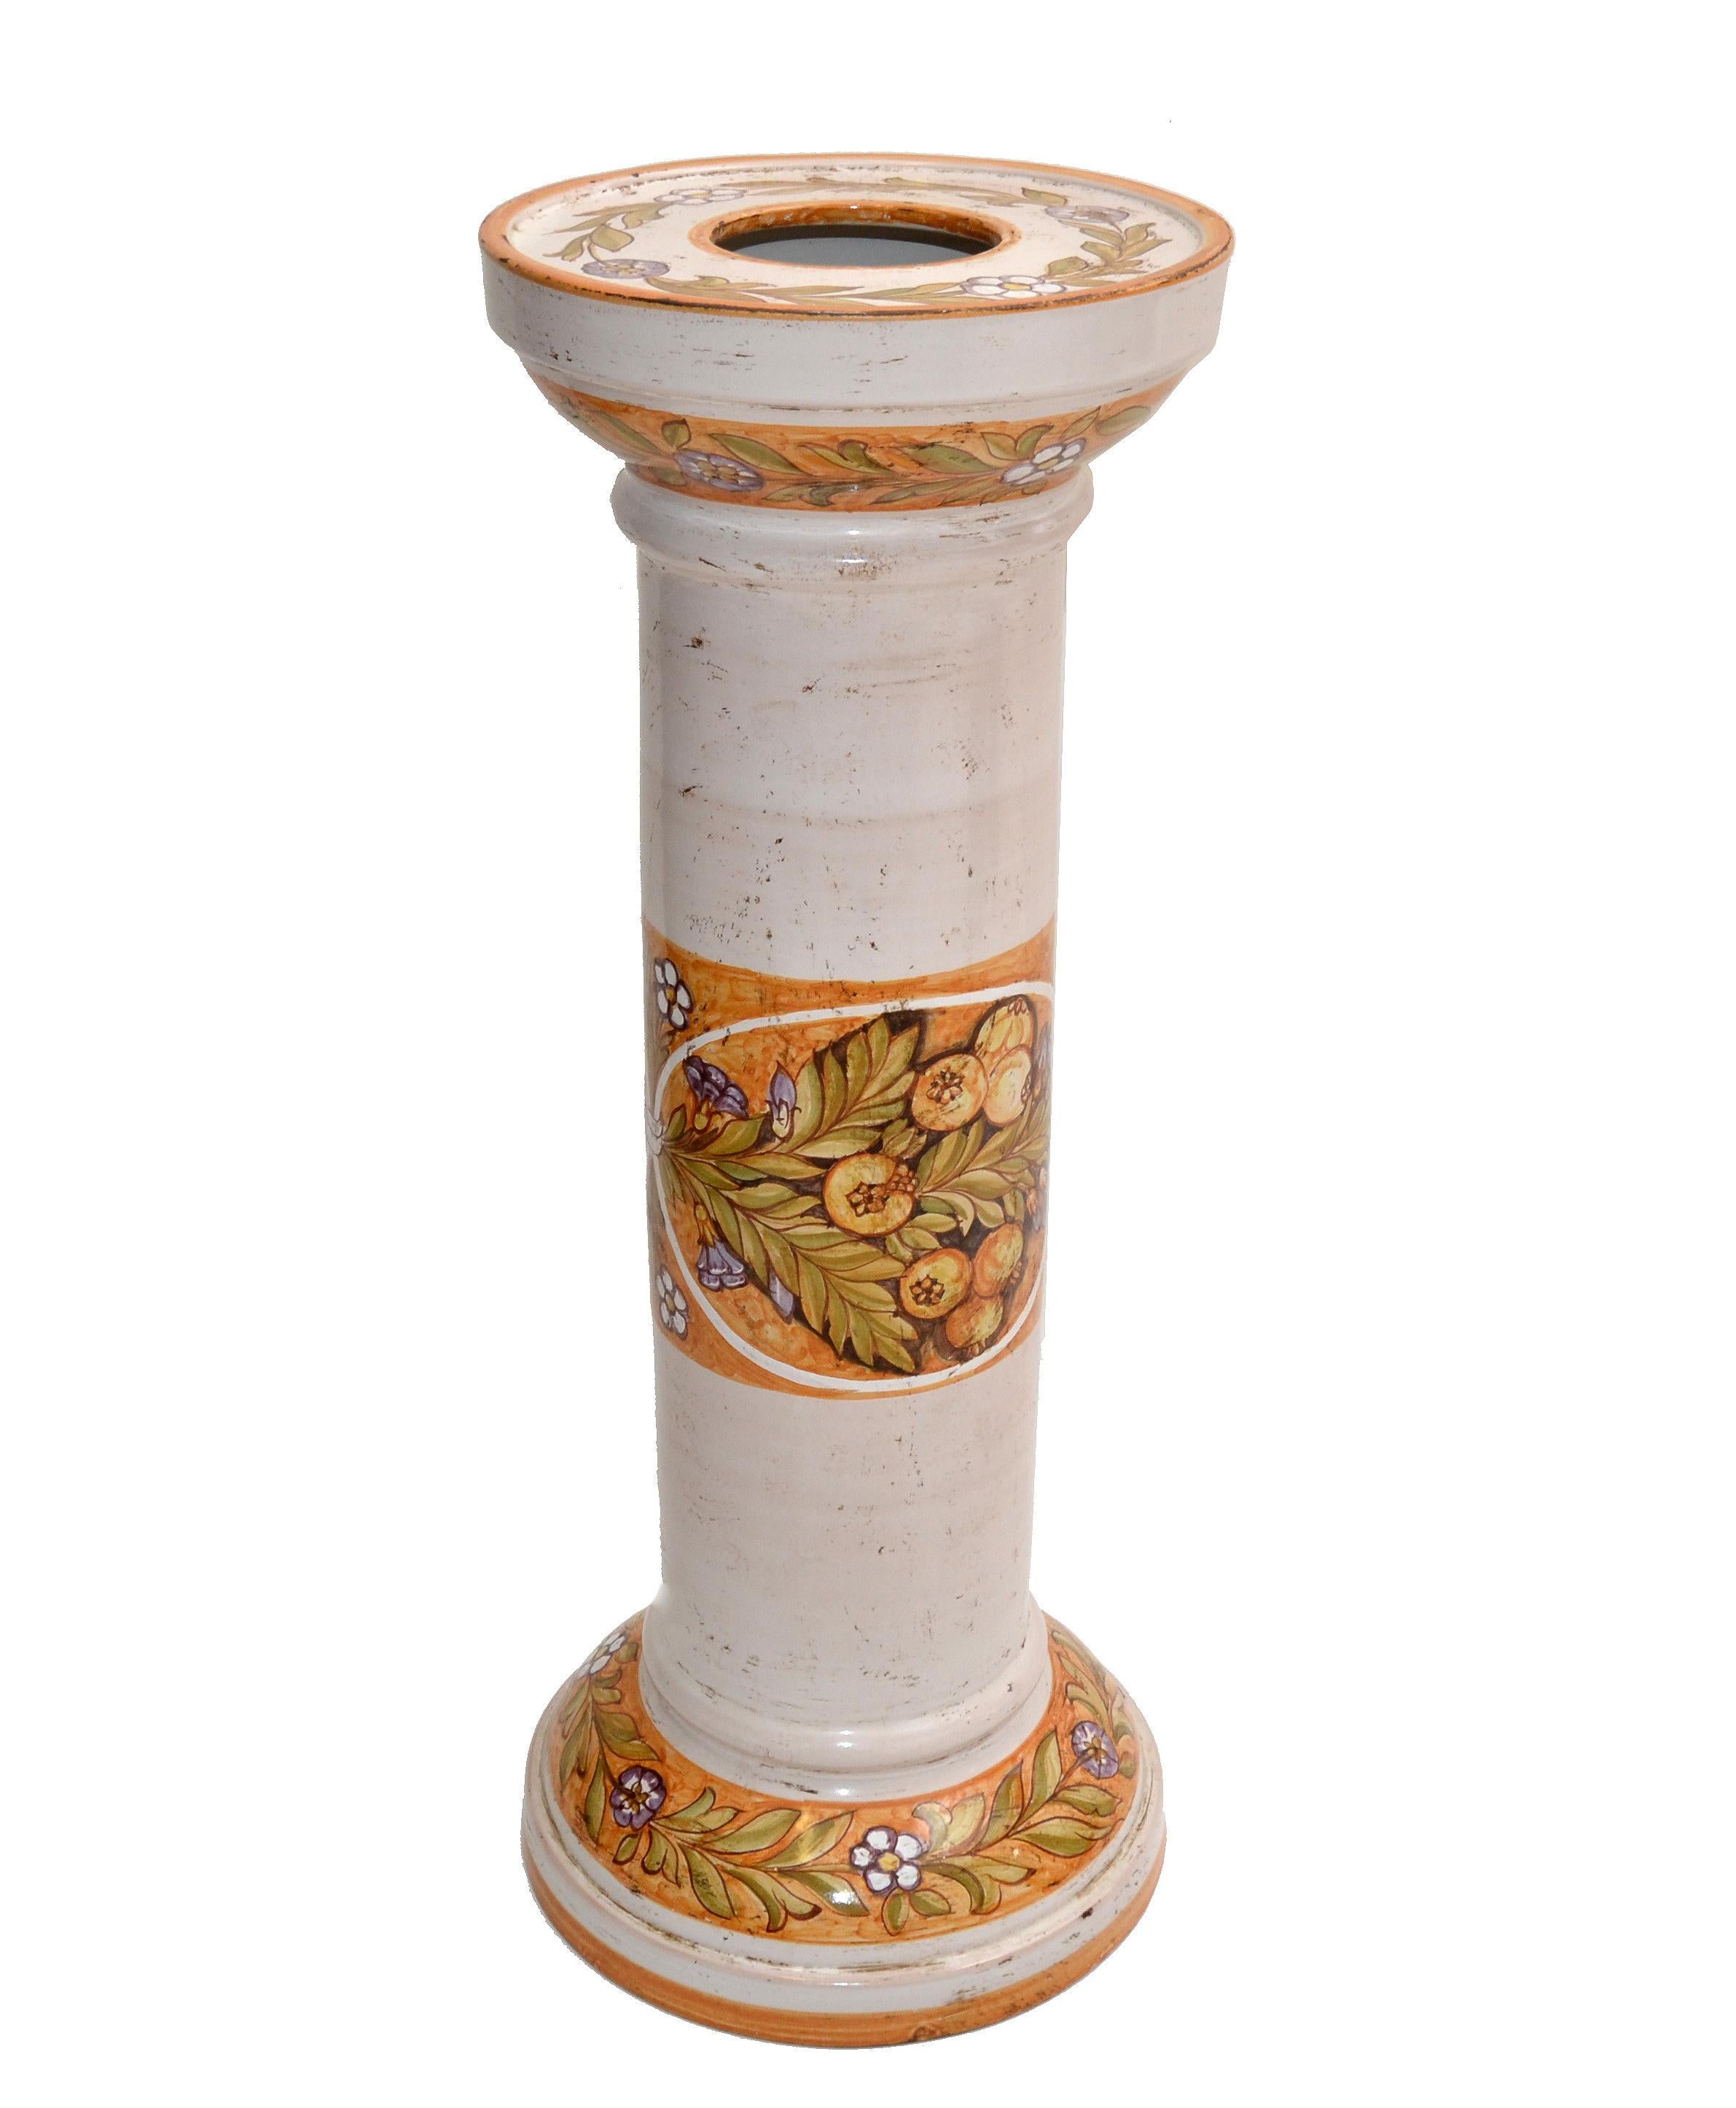 Italian handcrafted and hand painted Deruta Ceramic Floor Vase, Pedestal with a beige, yellow flower motif.
The outside and inside is glazed.
Signed by Artist at the Base.